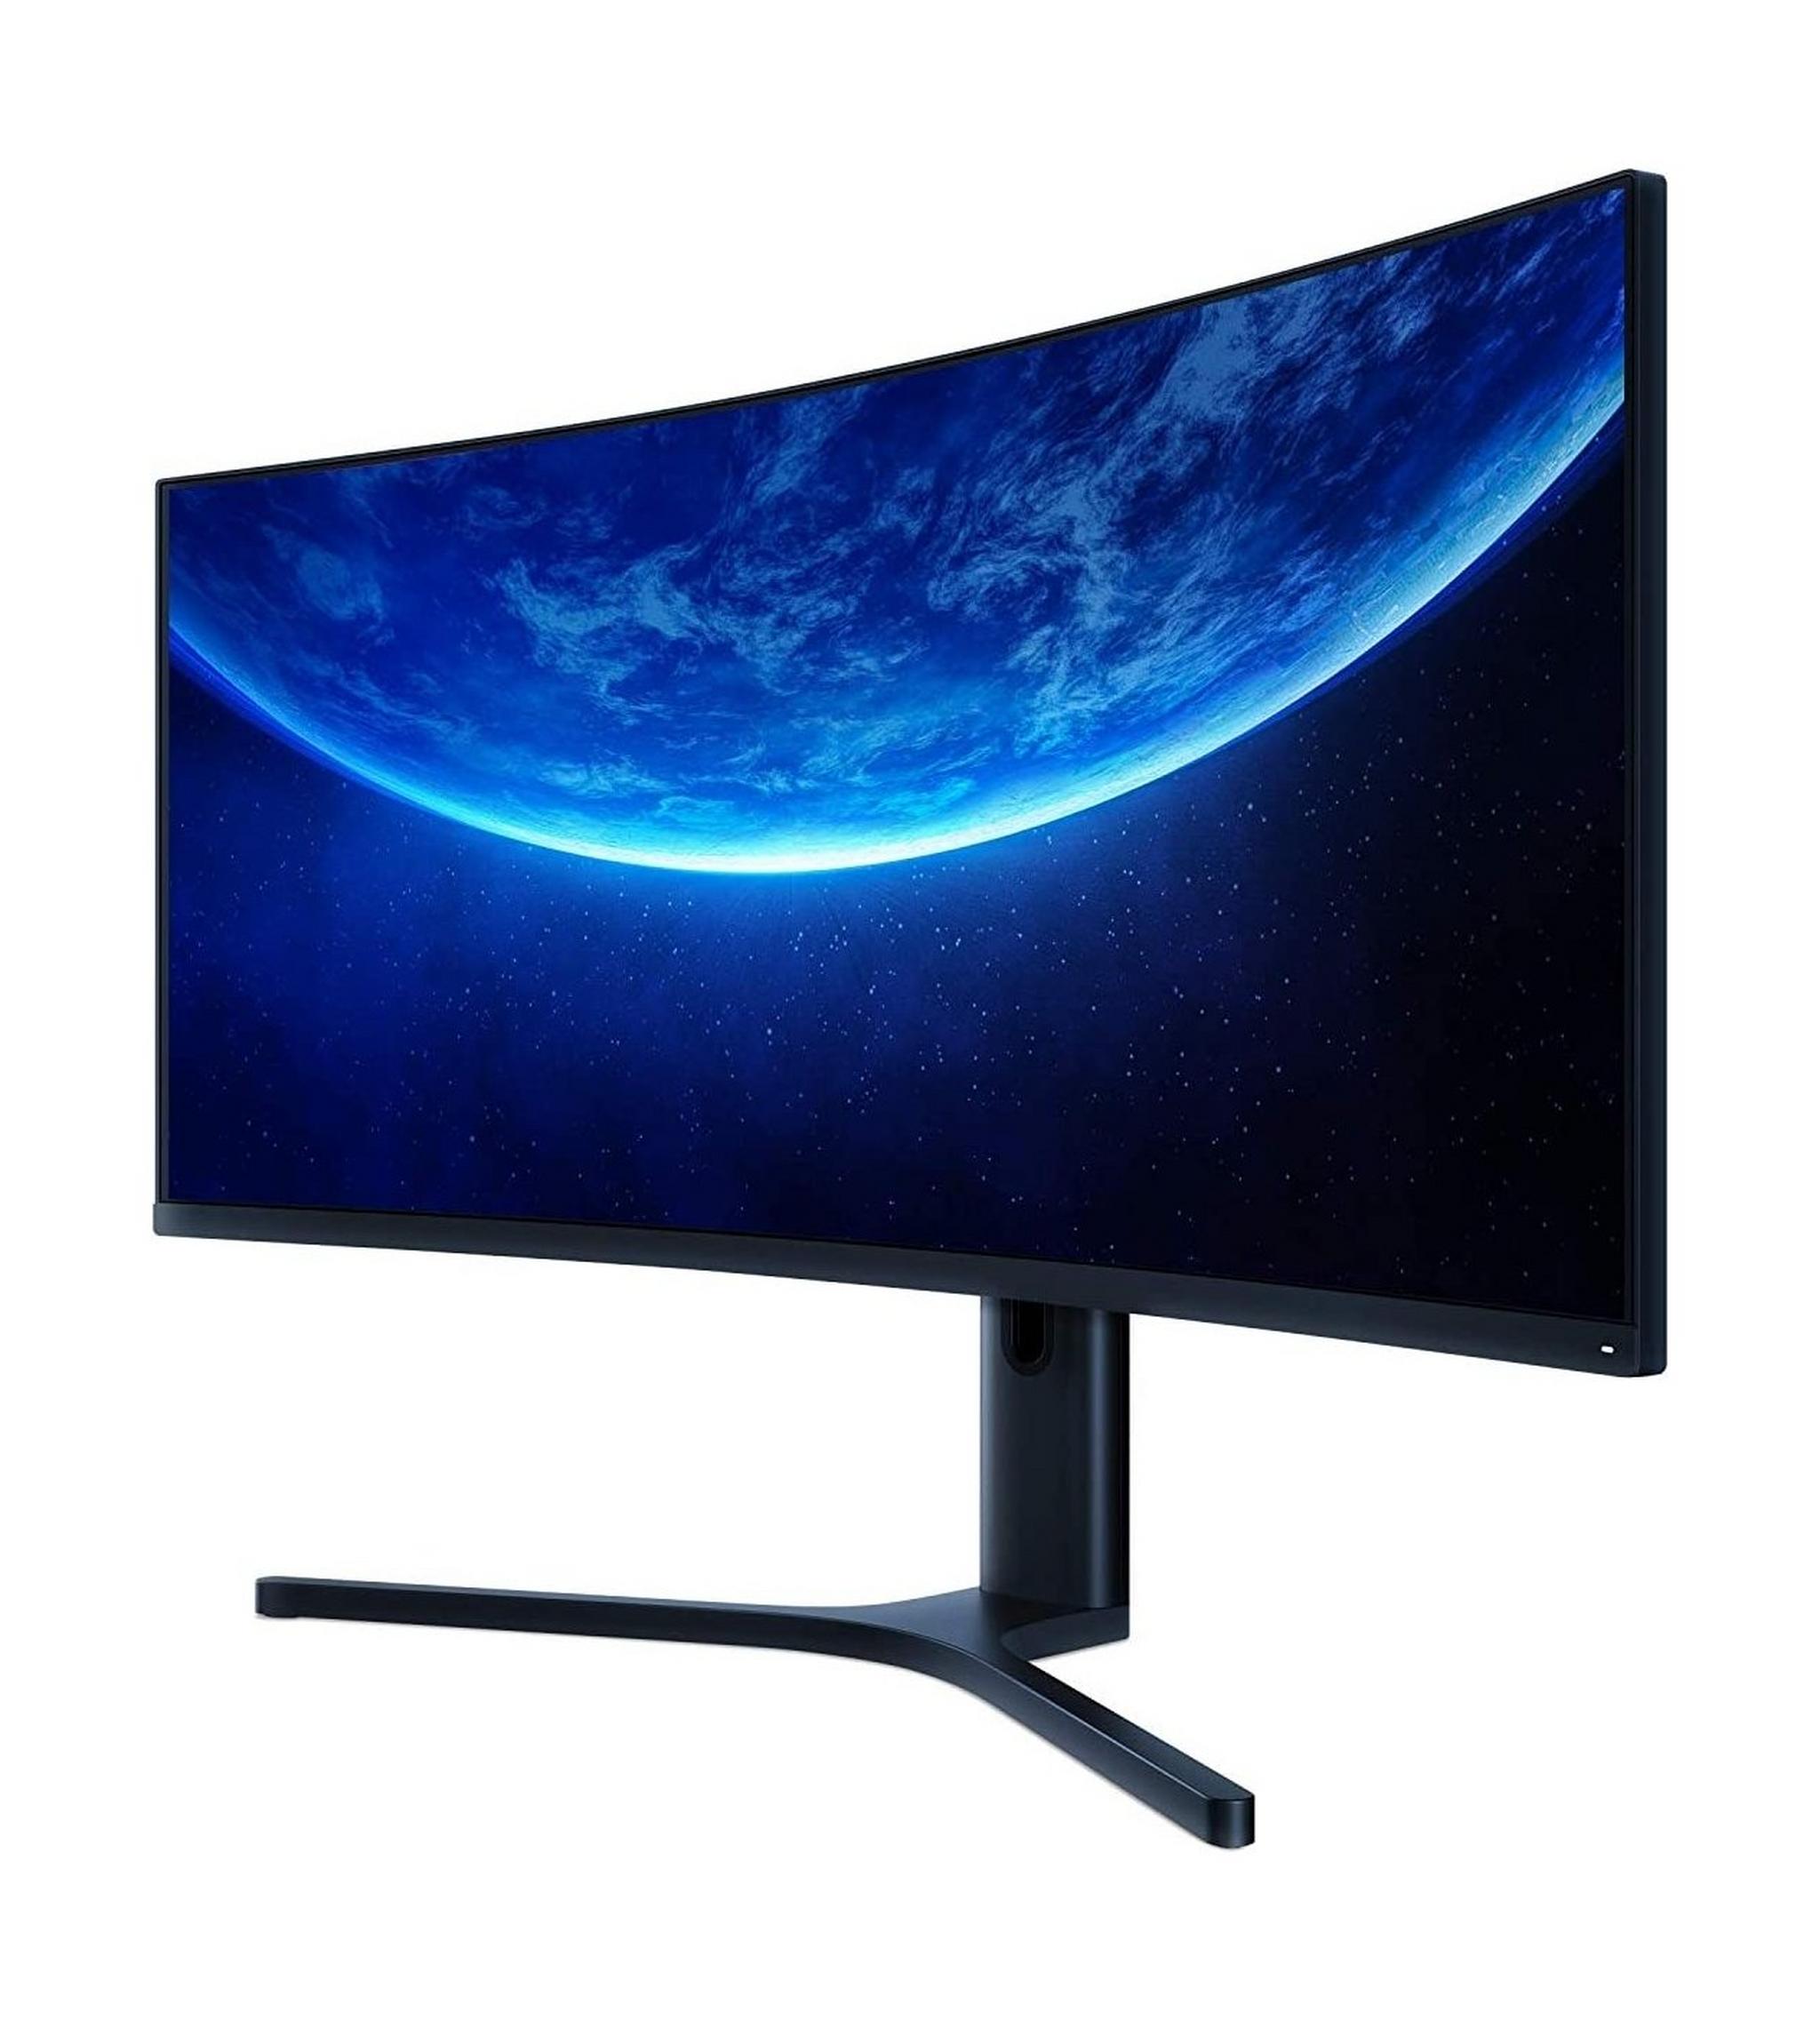 Xiaomi Curved 34-Inch 144Hz Gaming Monitor